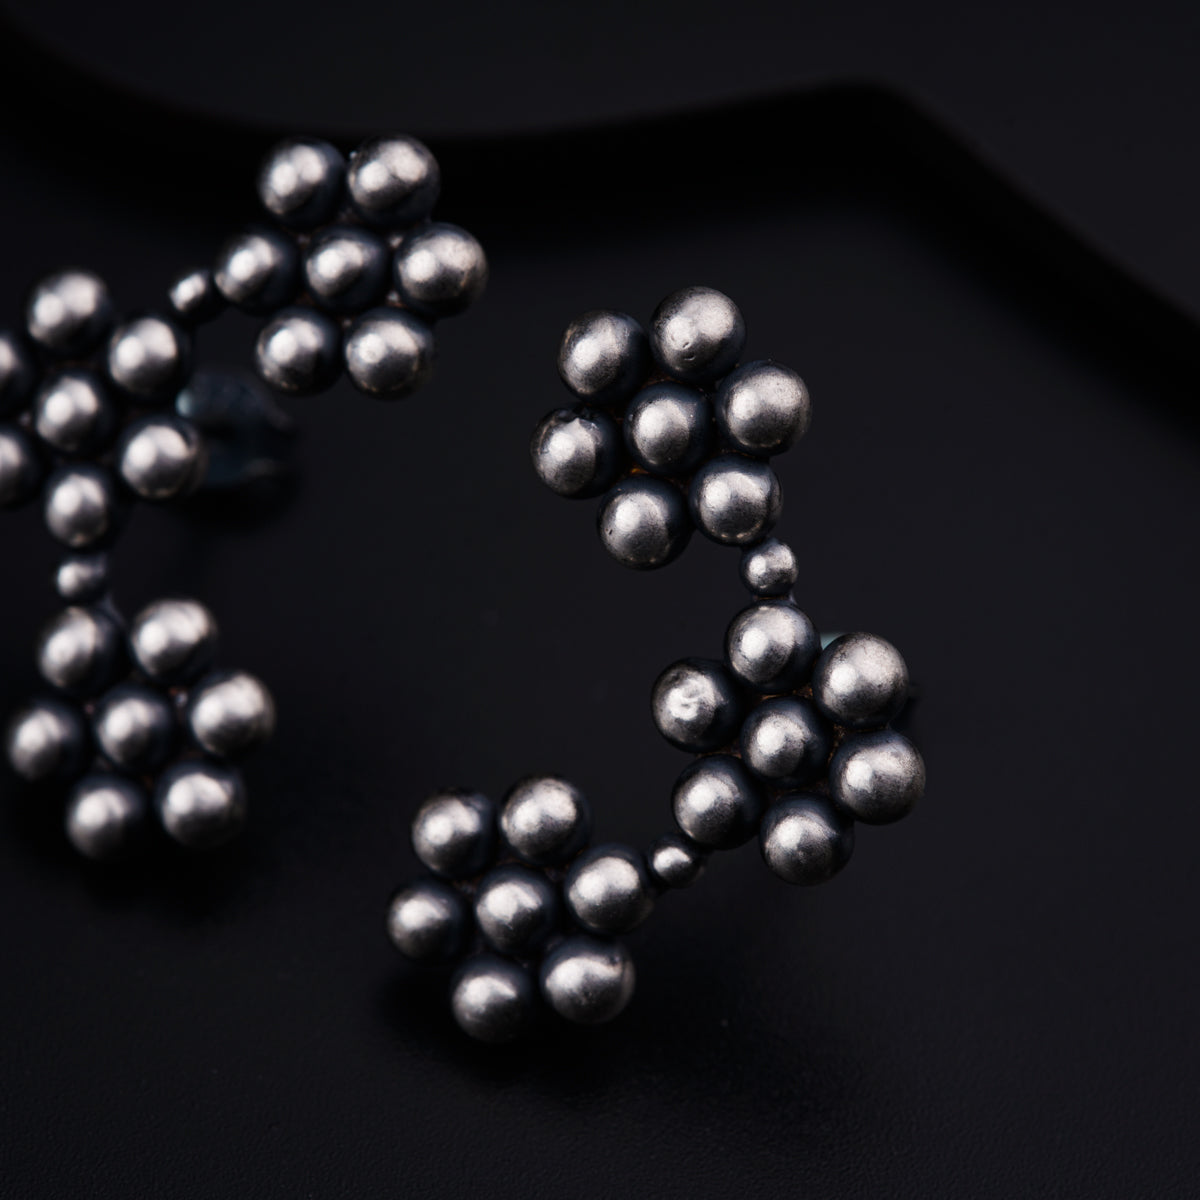 a close up of a bunch of balls on a black surface